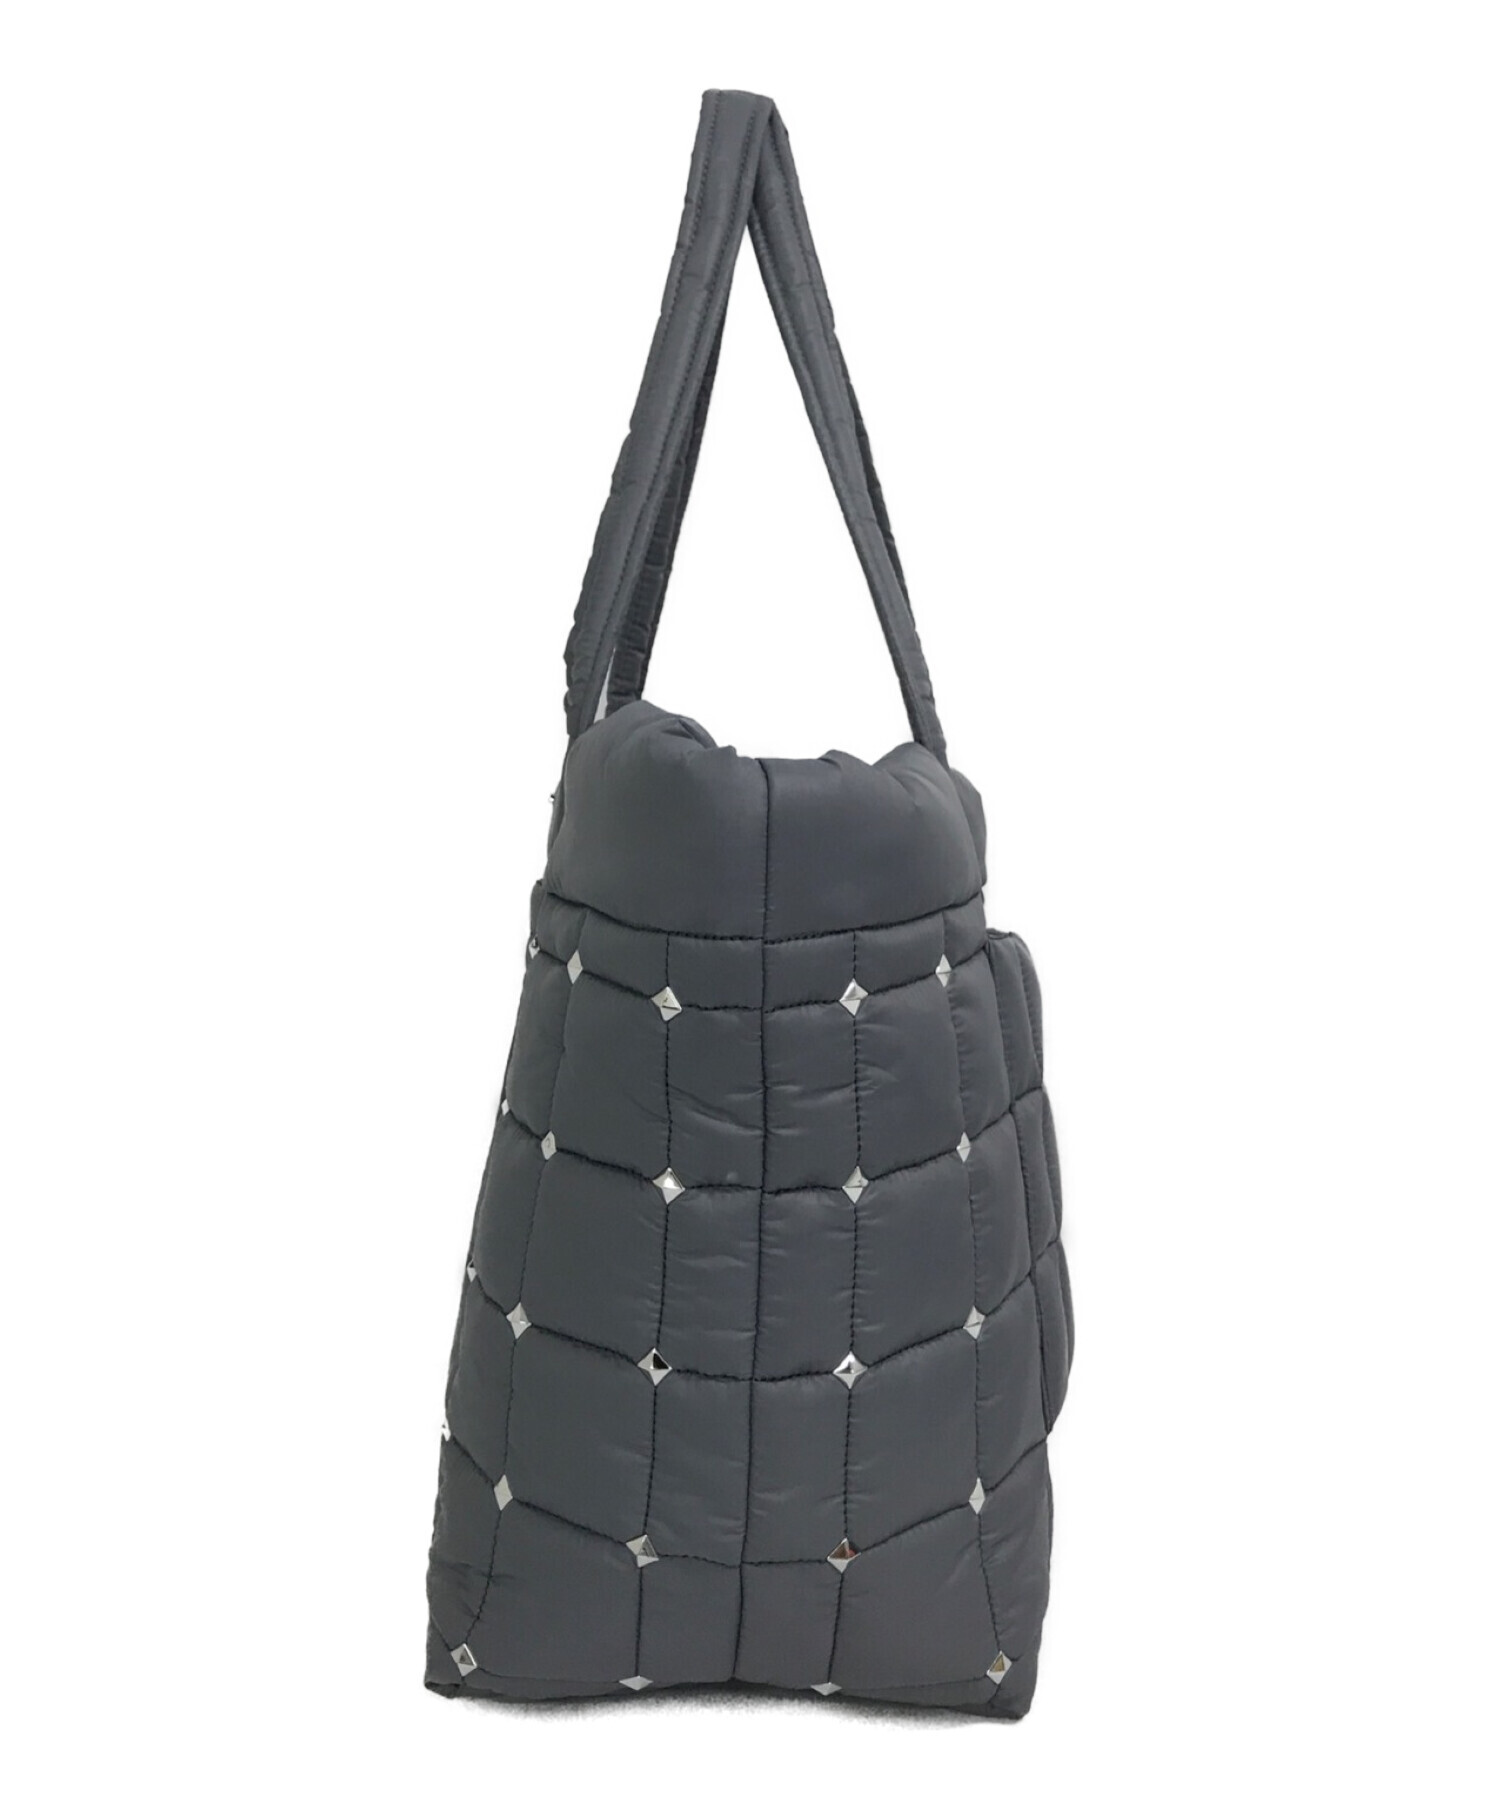 Michael Kors Stirling Large Quilted Padded Tote Bag - Grey